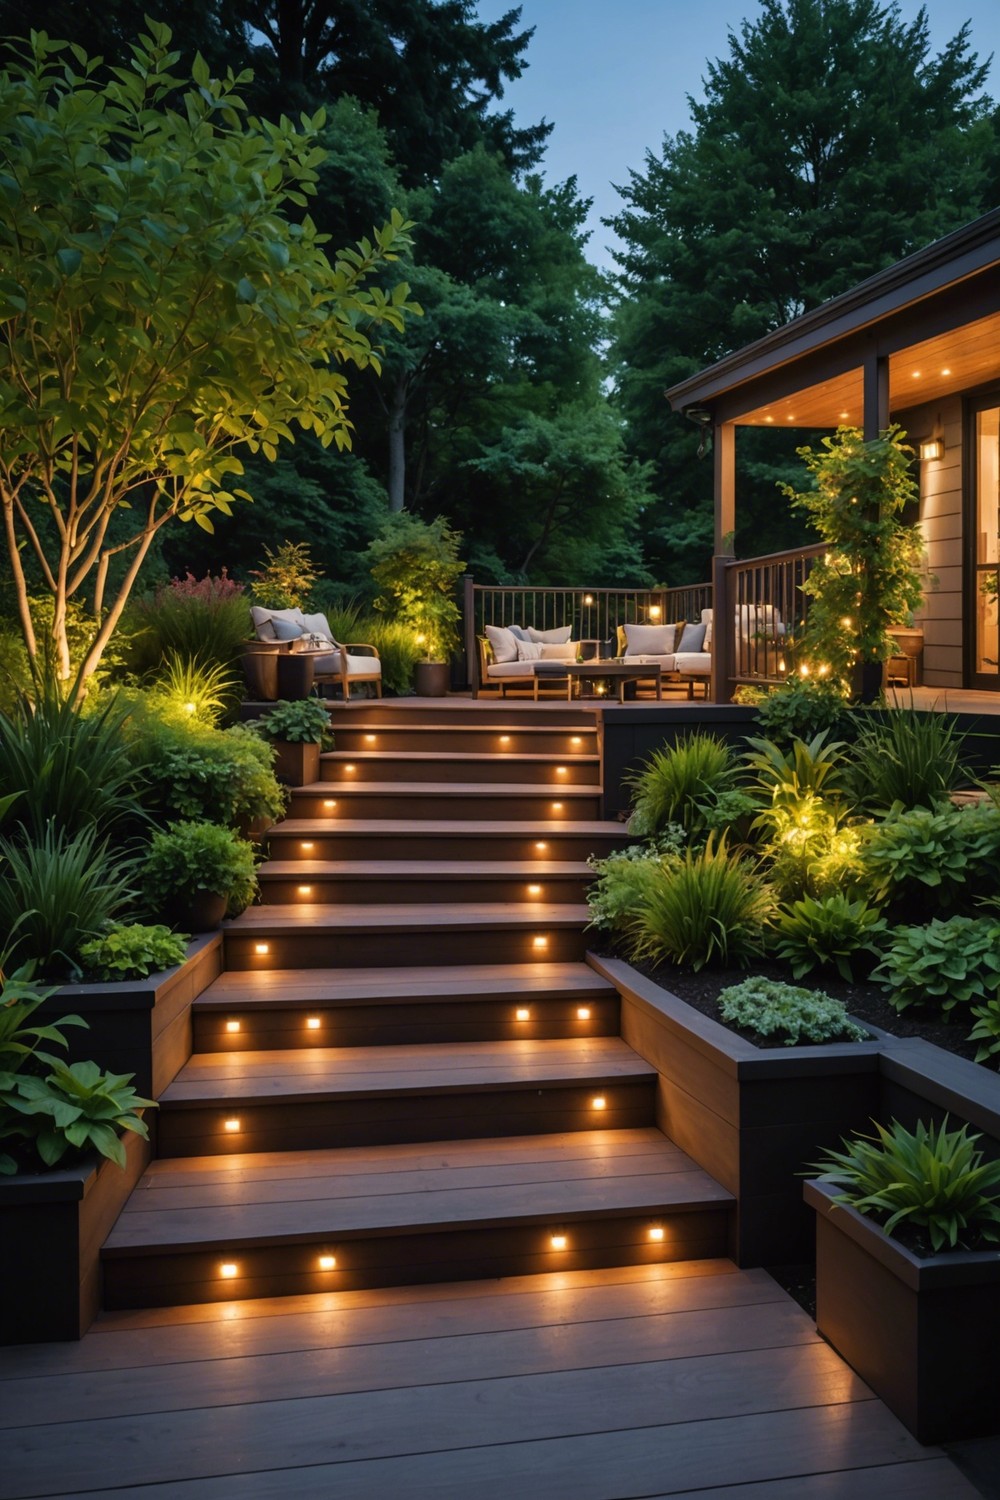 Deck with Built-in Lighting